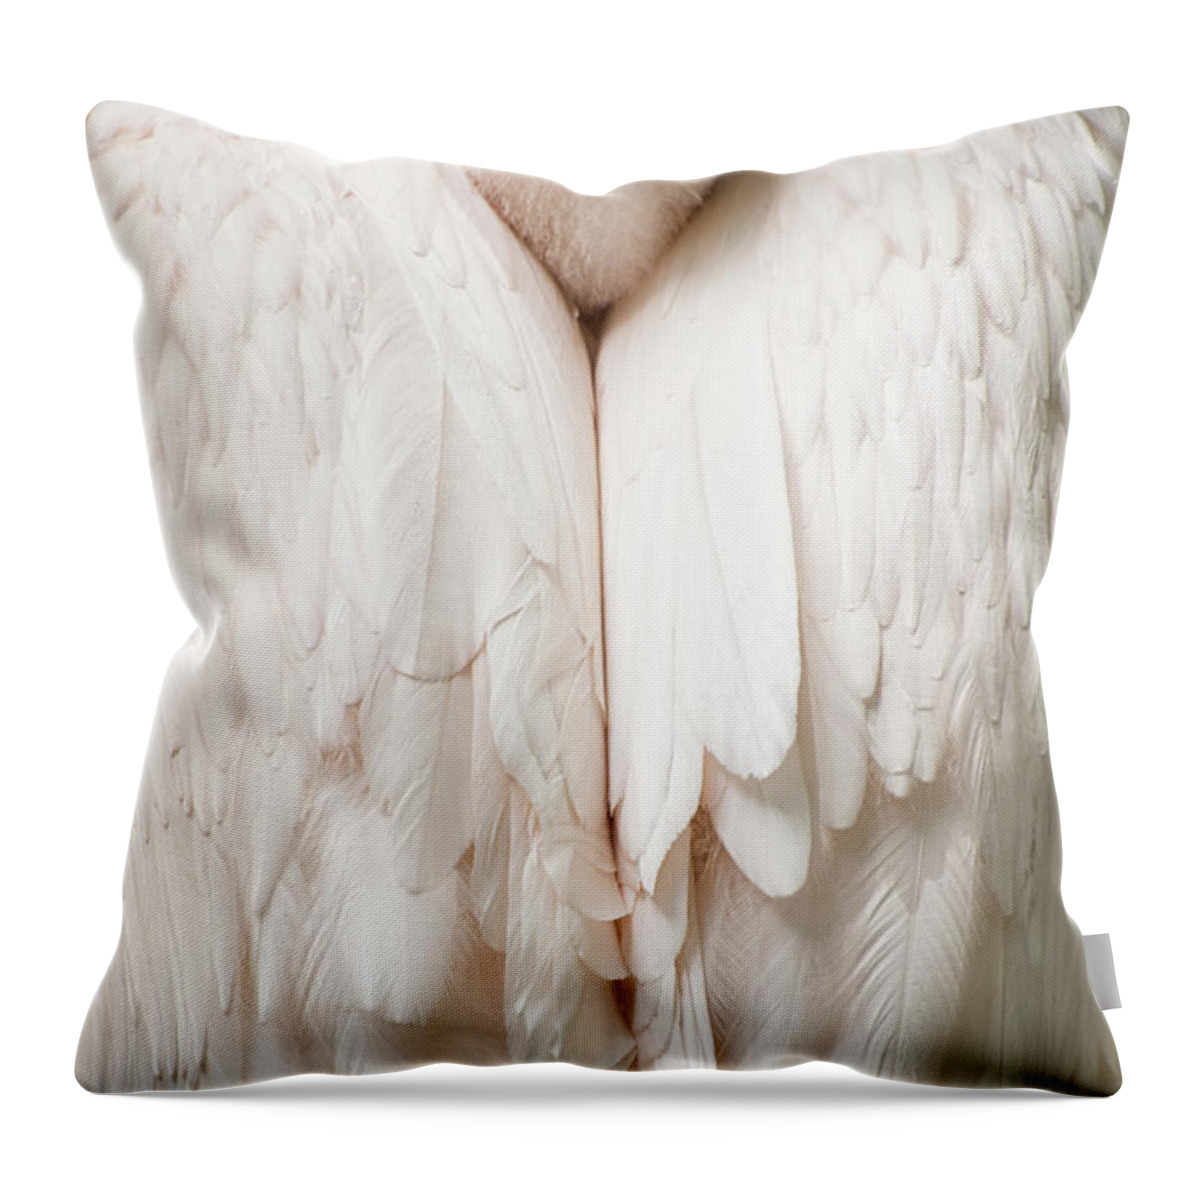 Eastern White Pelican Throw Pillow featuring the photograph Feathers by Kuni Photography